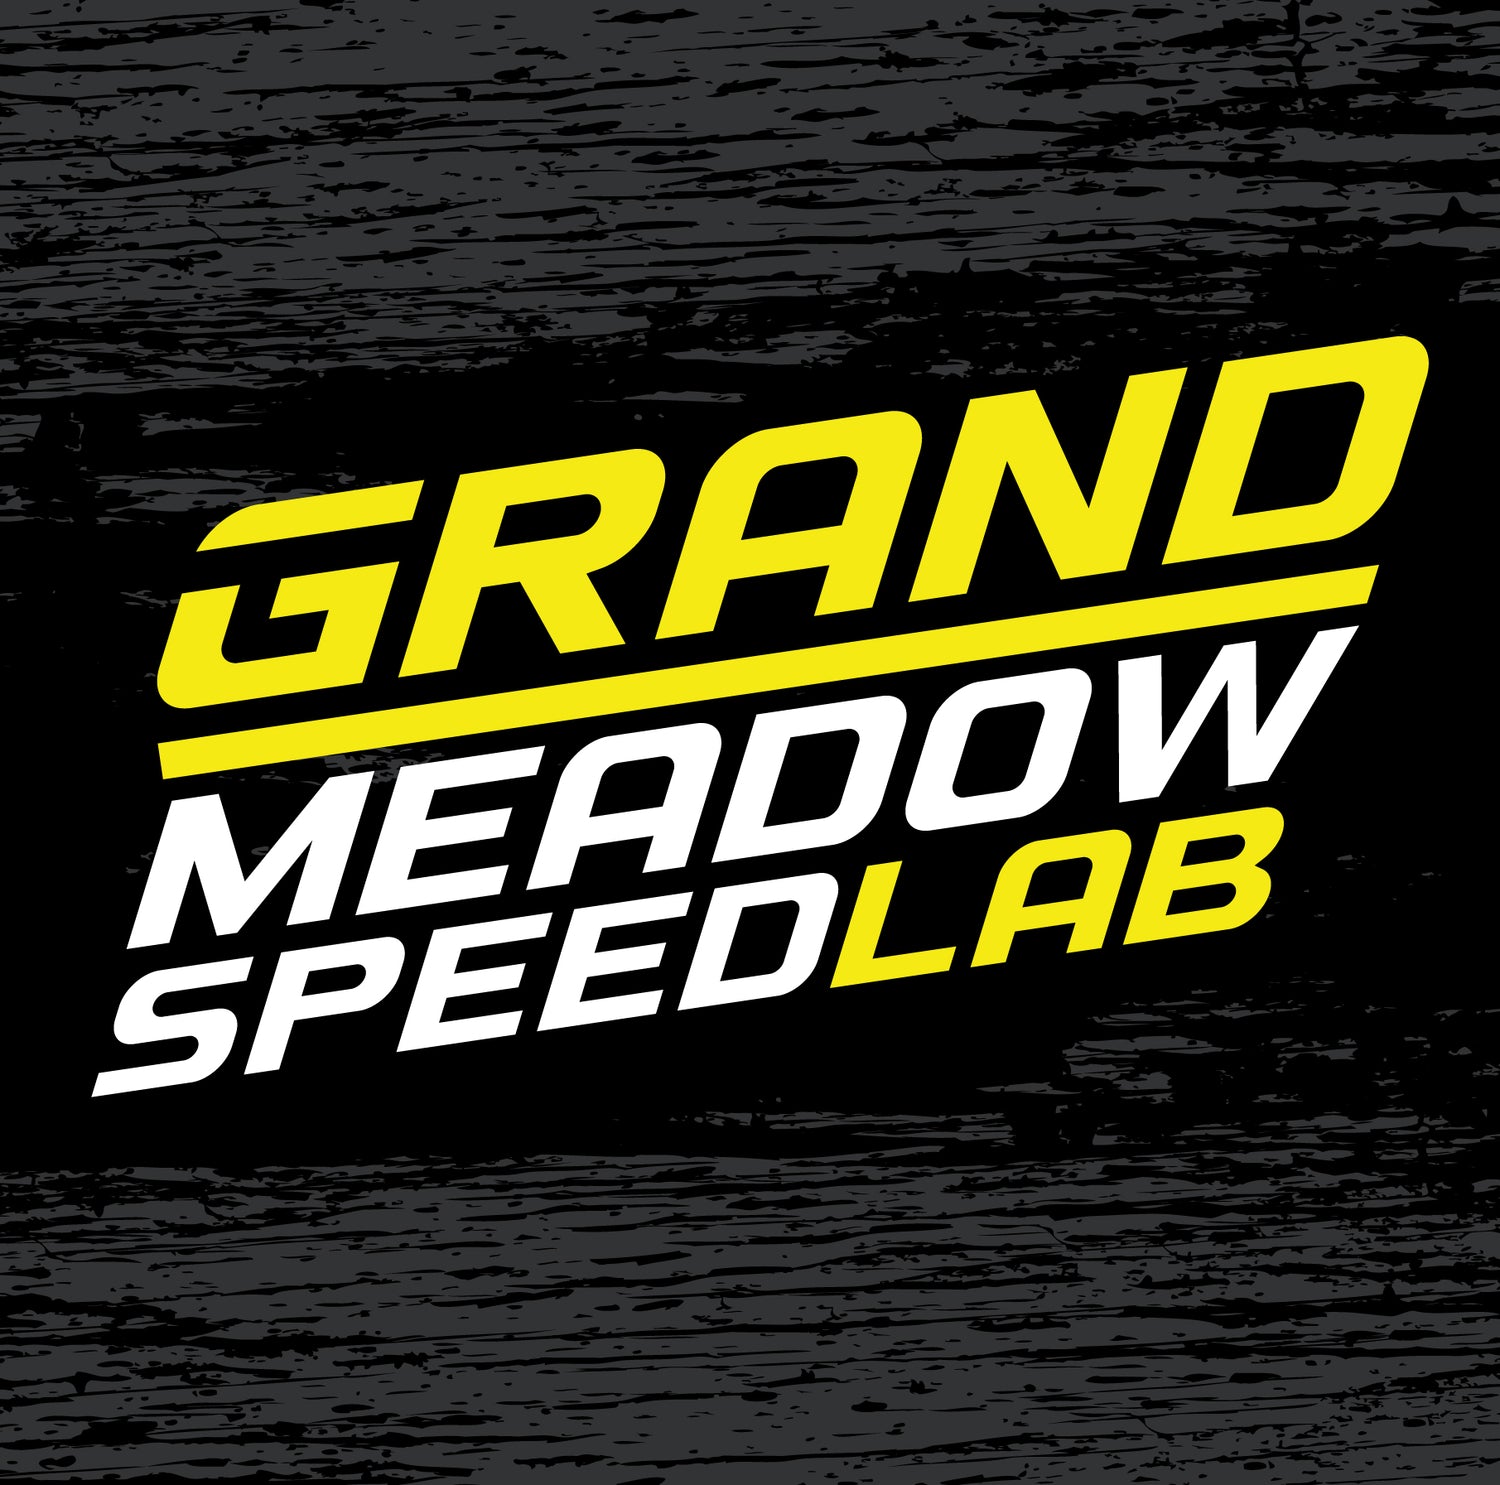 Grand Meadow Speed Lab